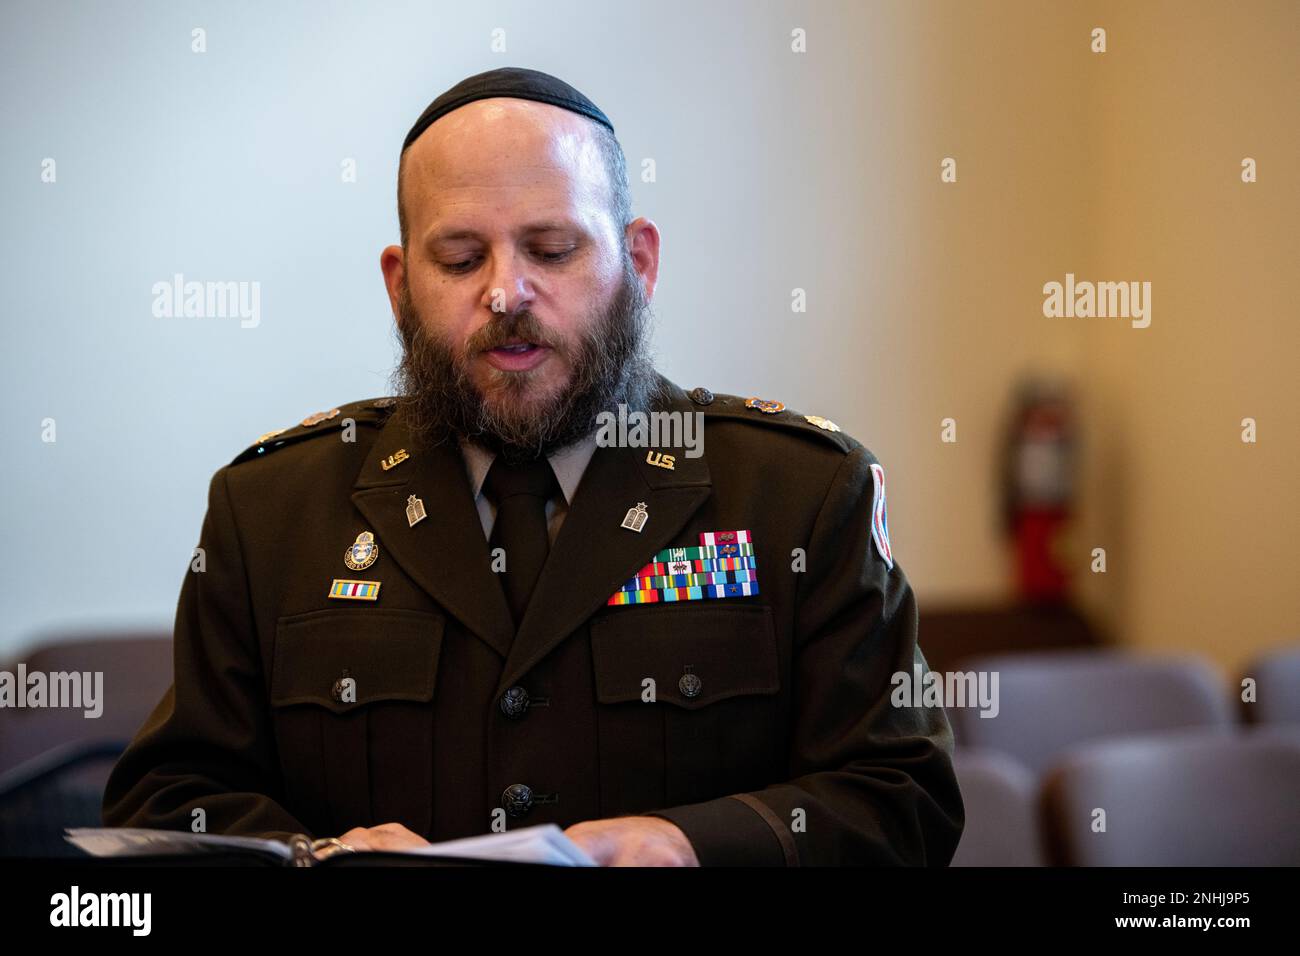 U.S. Army Chaplain Maj. Mendy Stern, Jewish Chaplain for JBSA and Brigade Chaplain, 103rd Signal Brigade, begins the awards ceremony for U.S. Army Air Corps 1st Lt. Gerald Teldon, retired, for his honorable service as a pilot on July 29, 2022, at the Chabad Center for Jewish Life and Learning, San Antonio, Texas. Teldon, born in Bronx, N.Y., in 1924, joined the military in 1944. He completed 62 missions during WWII and the Korean War. Lt. Col. Andrew Stein, 502nd Operations Support Squadron commander, was the presiding officers. The awards presented to Teldon are as follows: the Air Medal; Ame Stock Photo